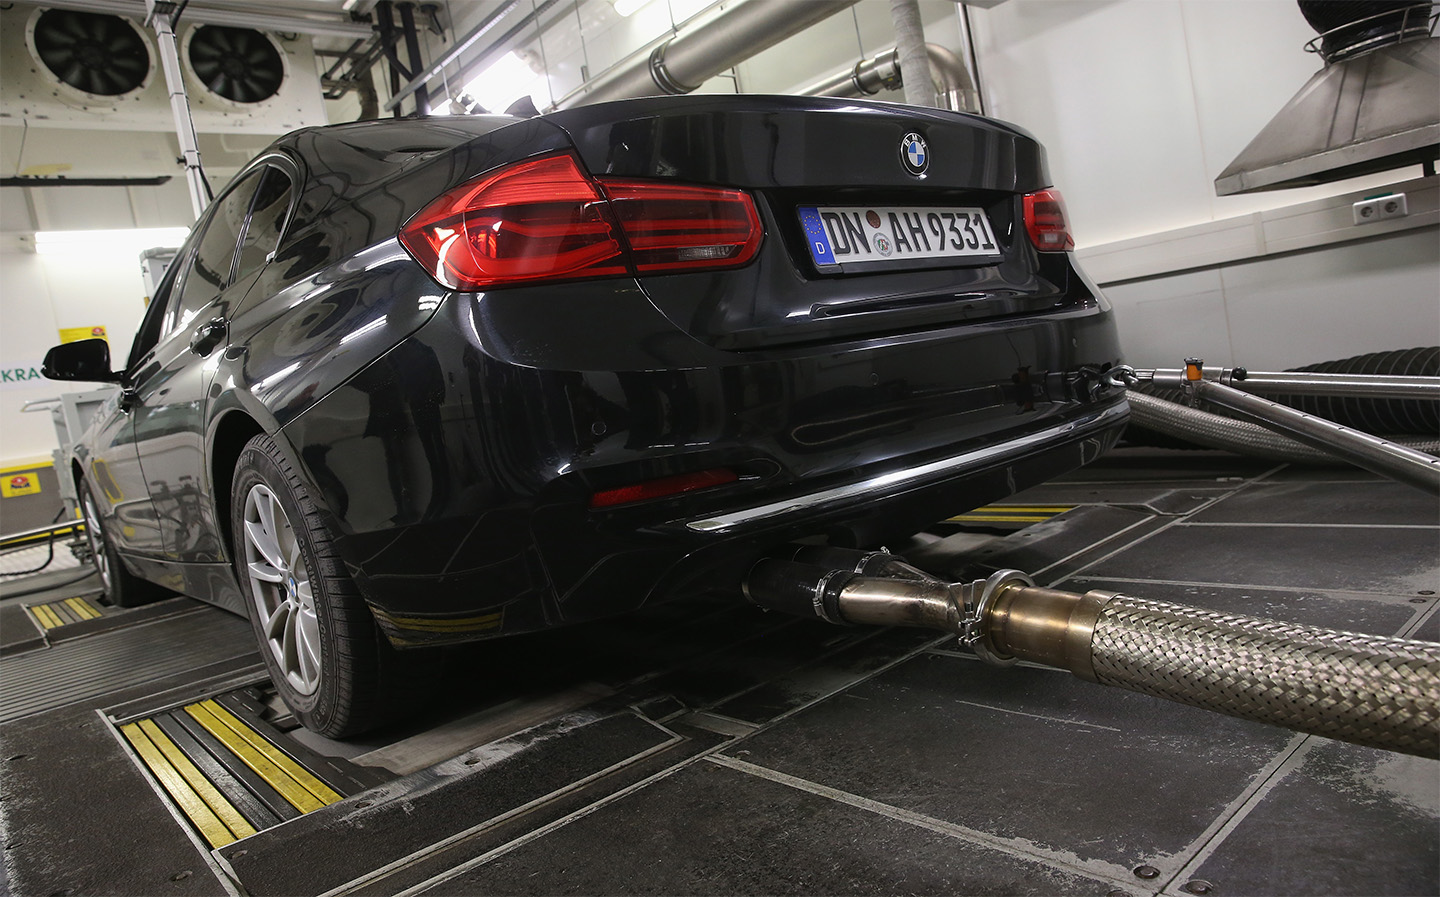 Car makers to face massive fines for cheating emissions tests